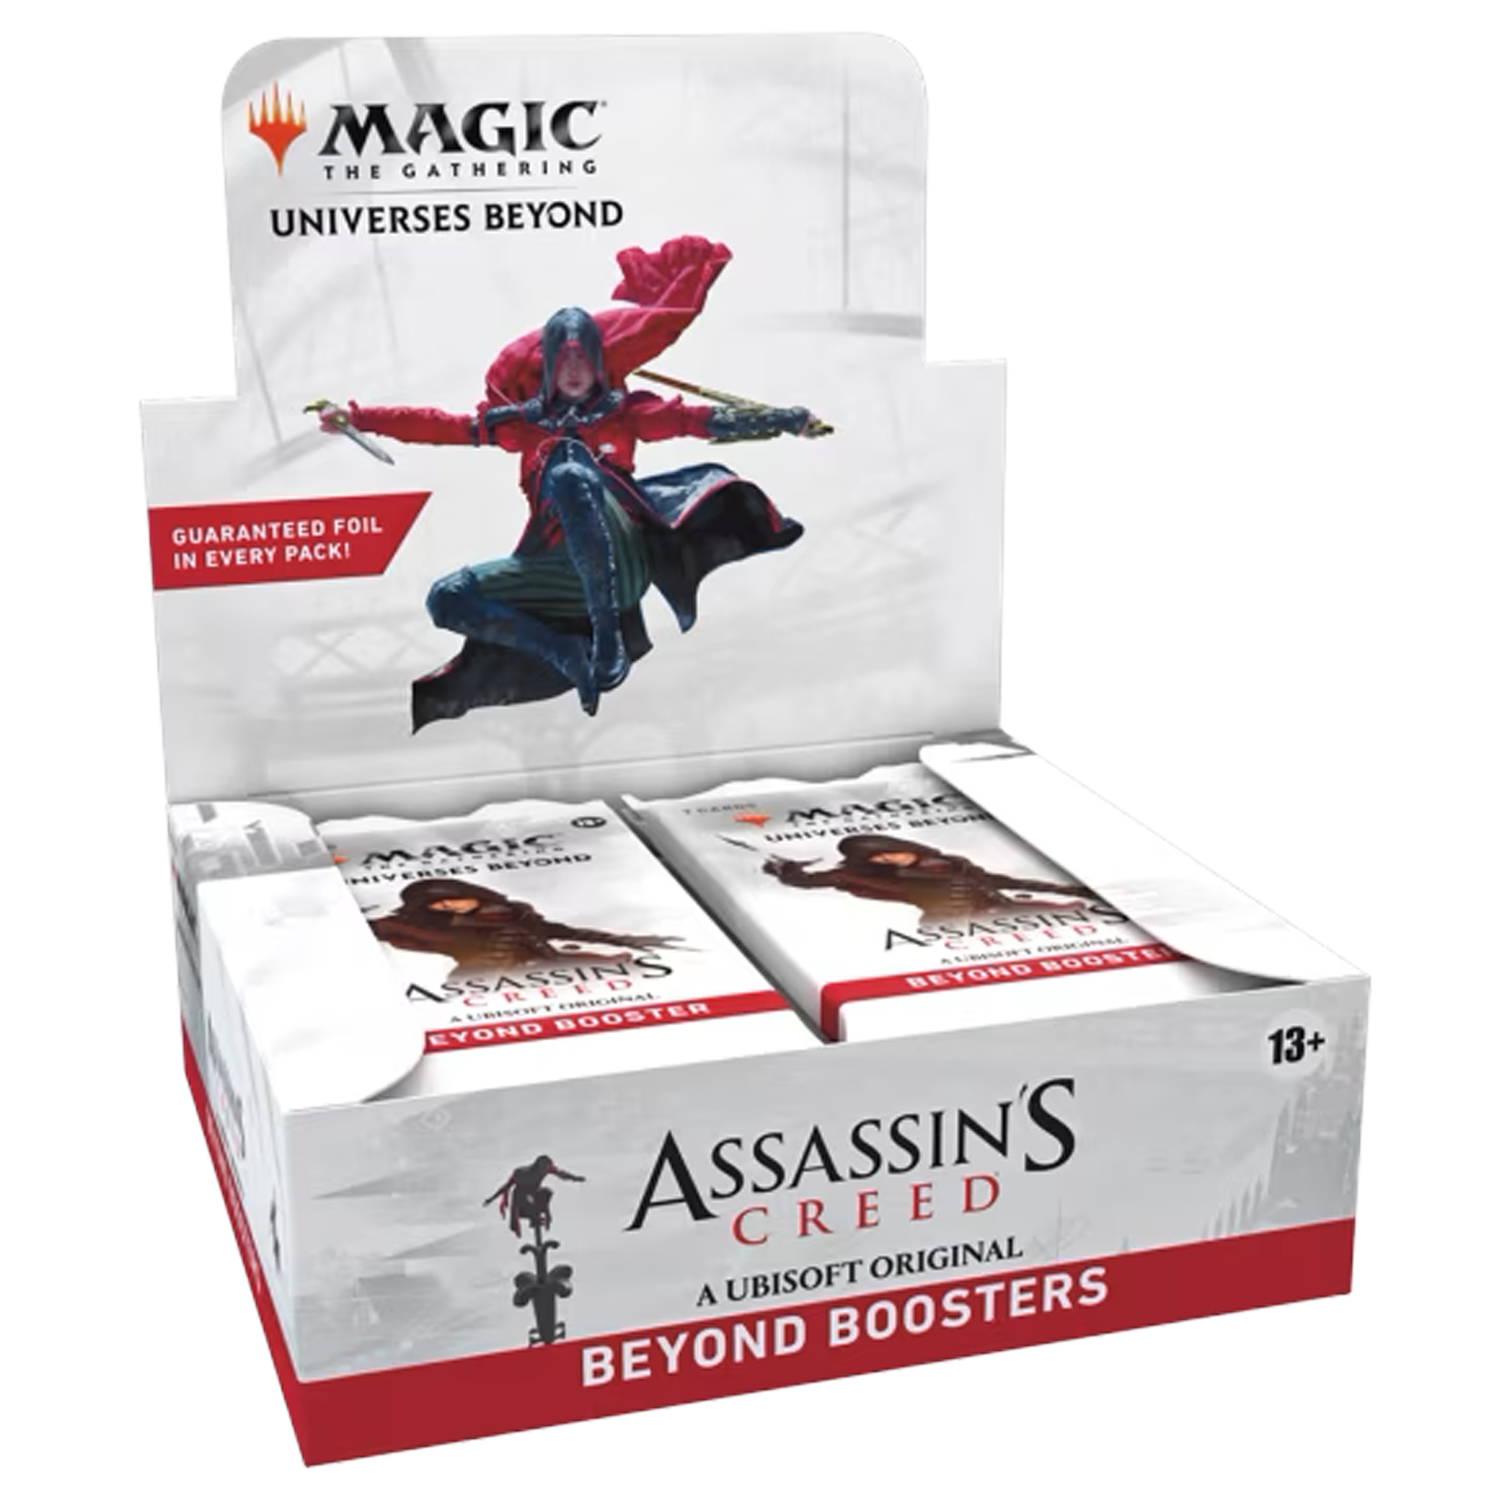 Universes Beyond: Assassin's Creed Beyond Booster Display - Magic the Gathering - EN